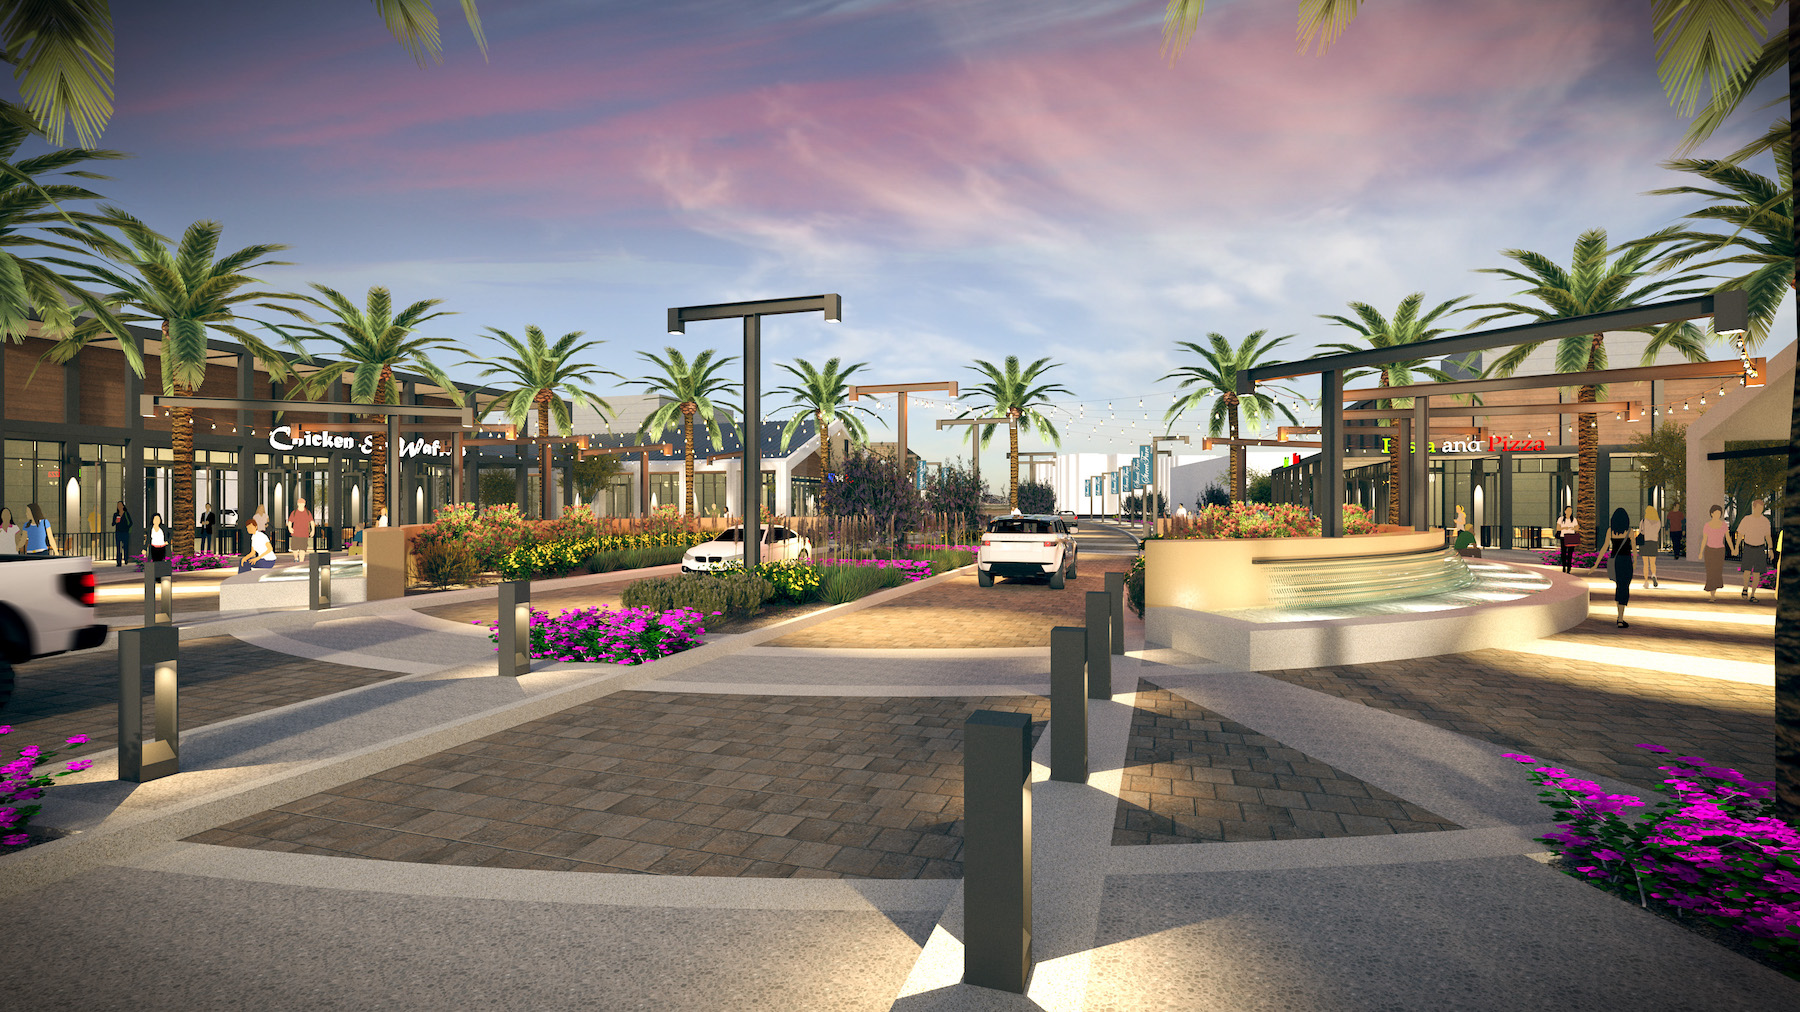 The outdoor mall will include dining and entertainment options.